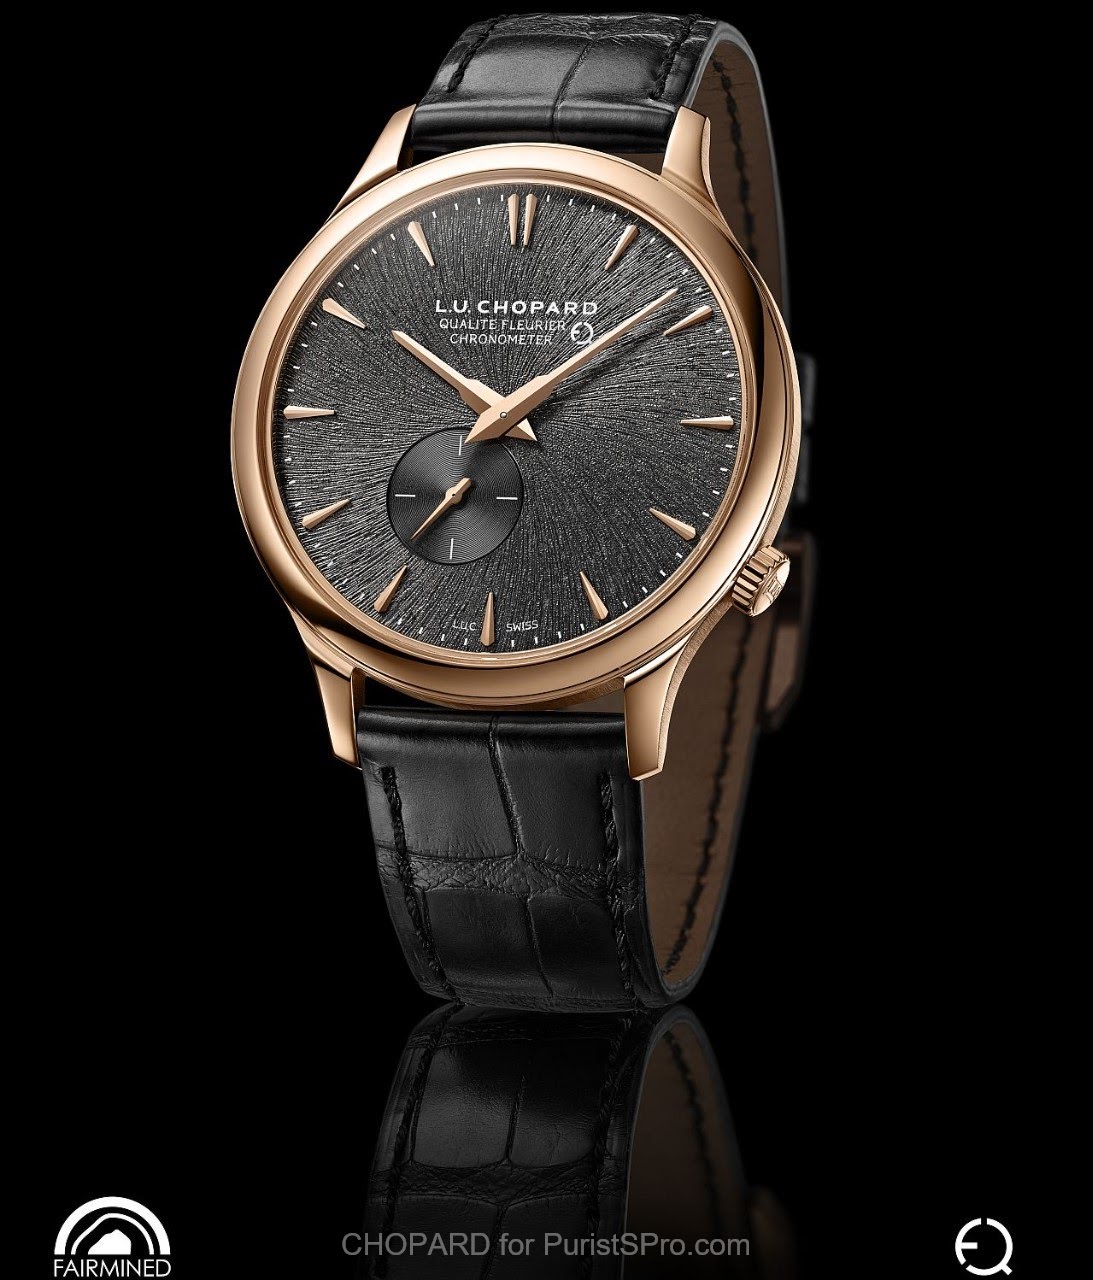 Introducing the Chopard L.U.C XPS in Fairmined Gold - Live photos